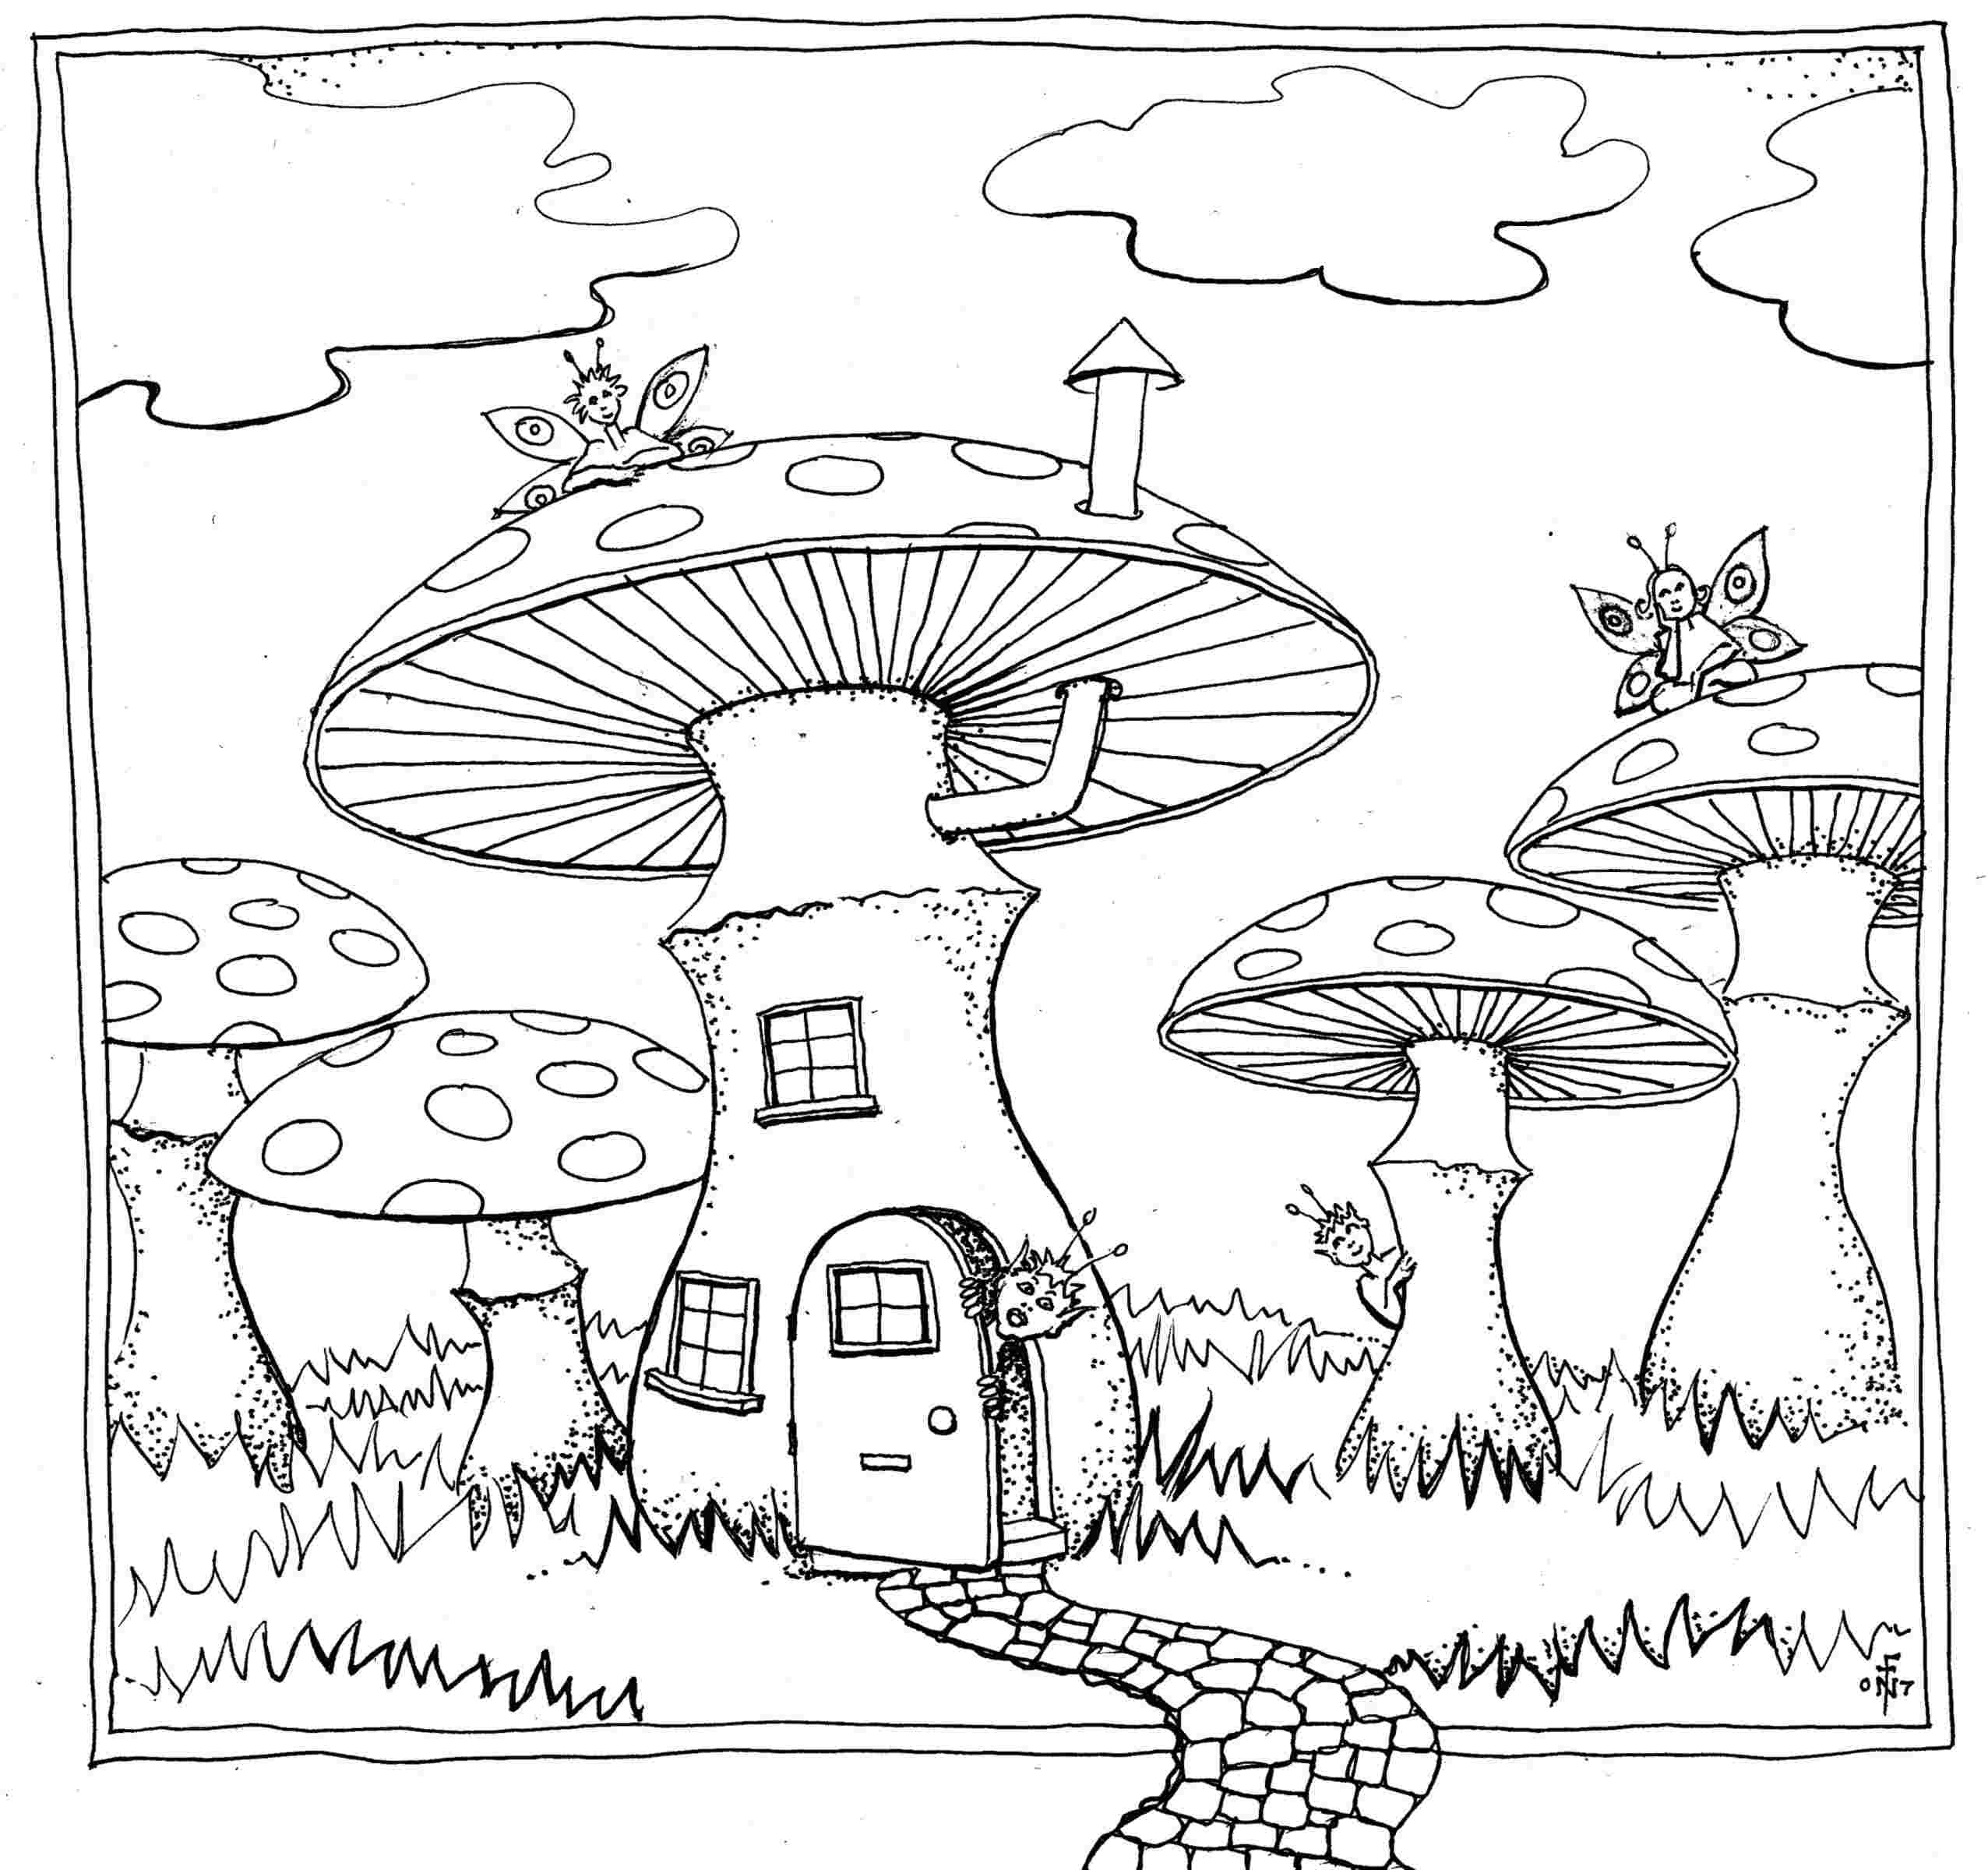 Mushroom Residence - colouring-in drawing - to download, right click and save, print out and colour in!